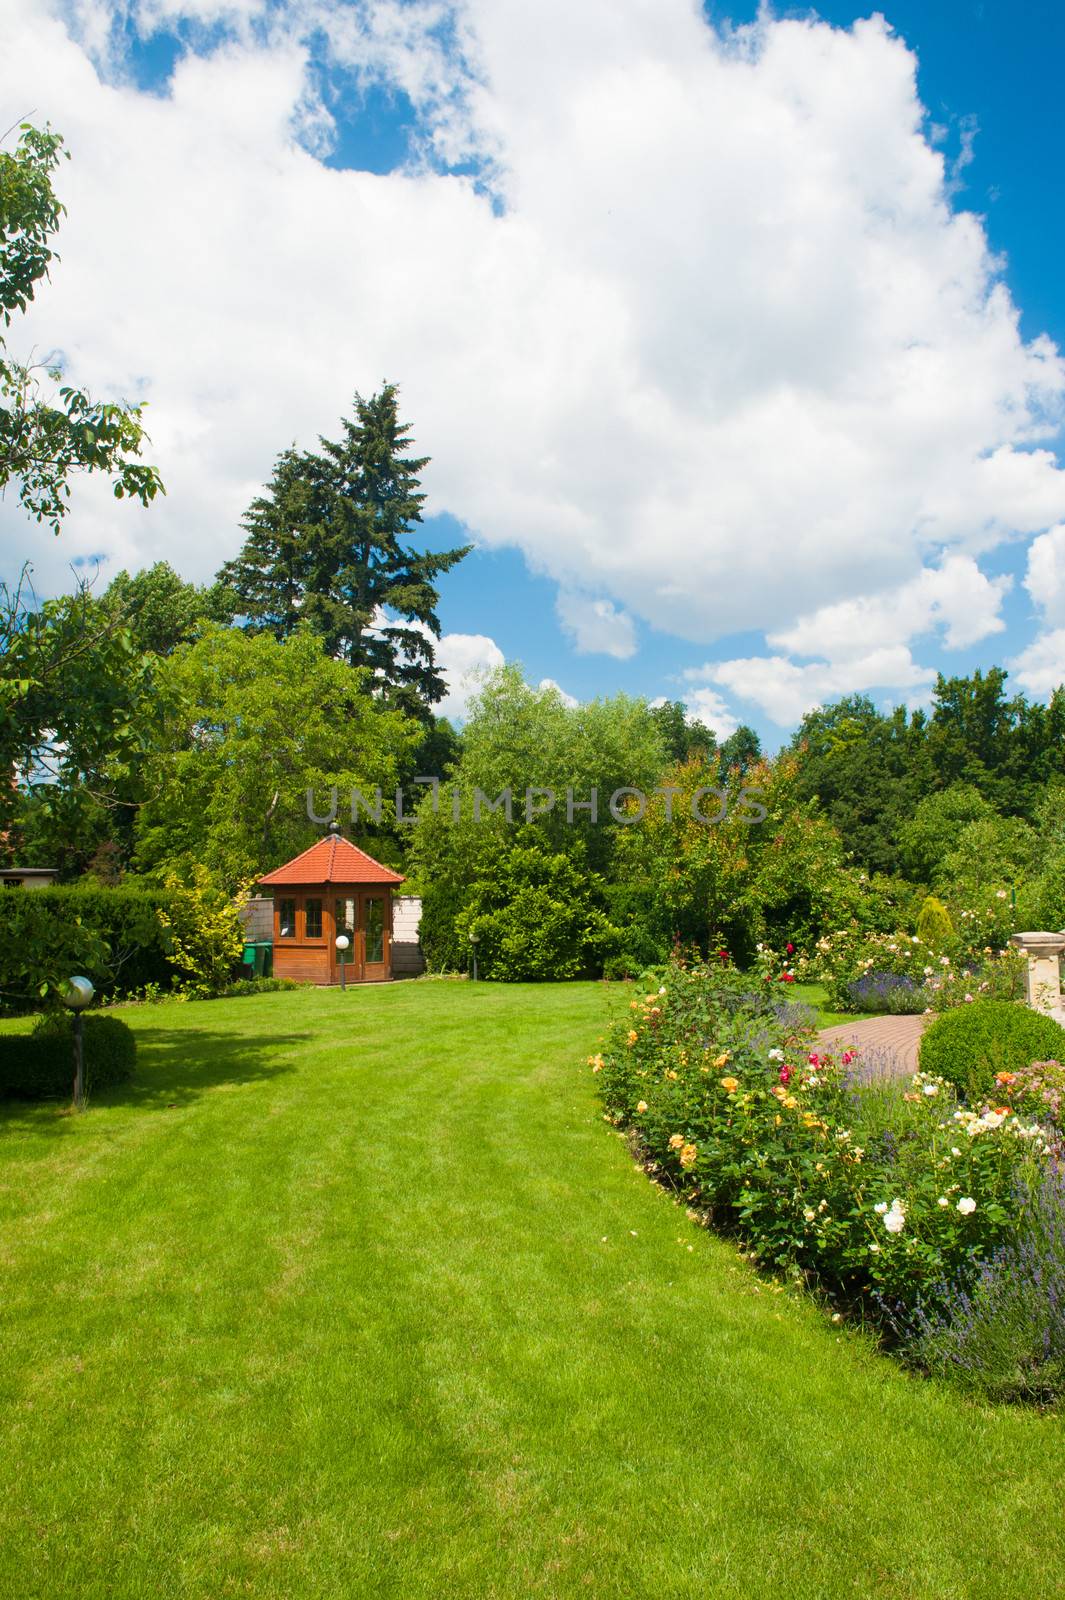 Beautiful garden with blooming roses and a small gazebo